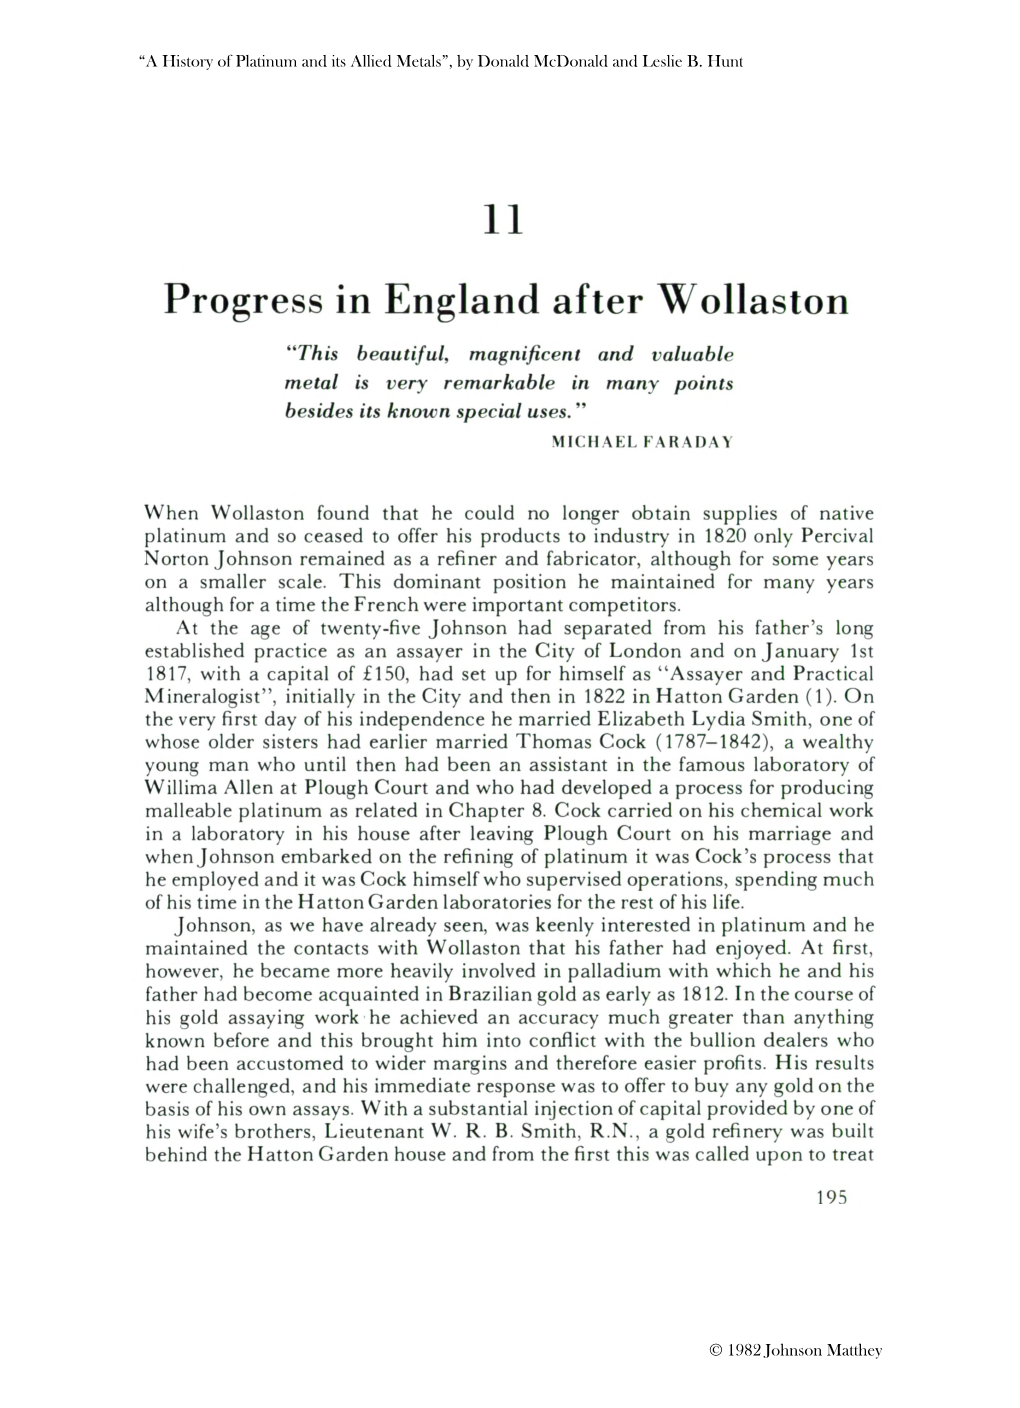 Progress in England After Wollaston